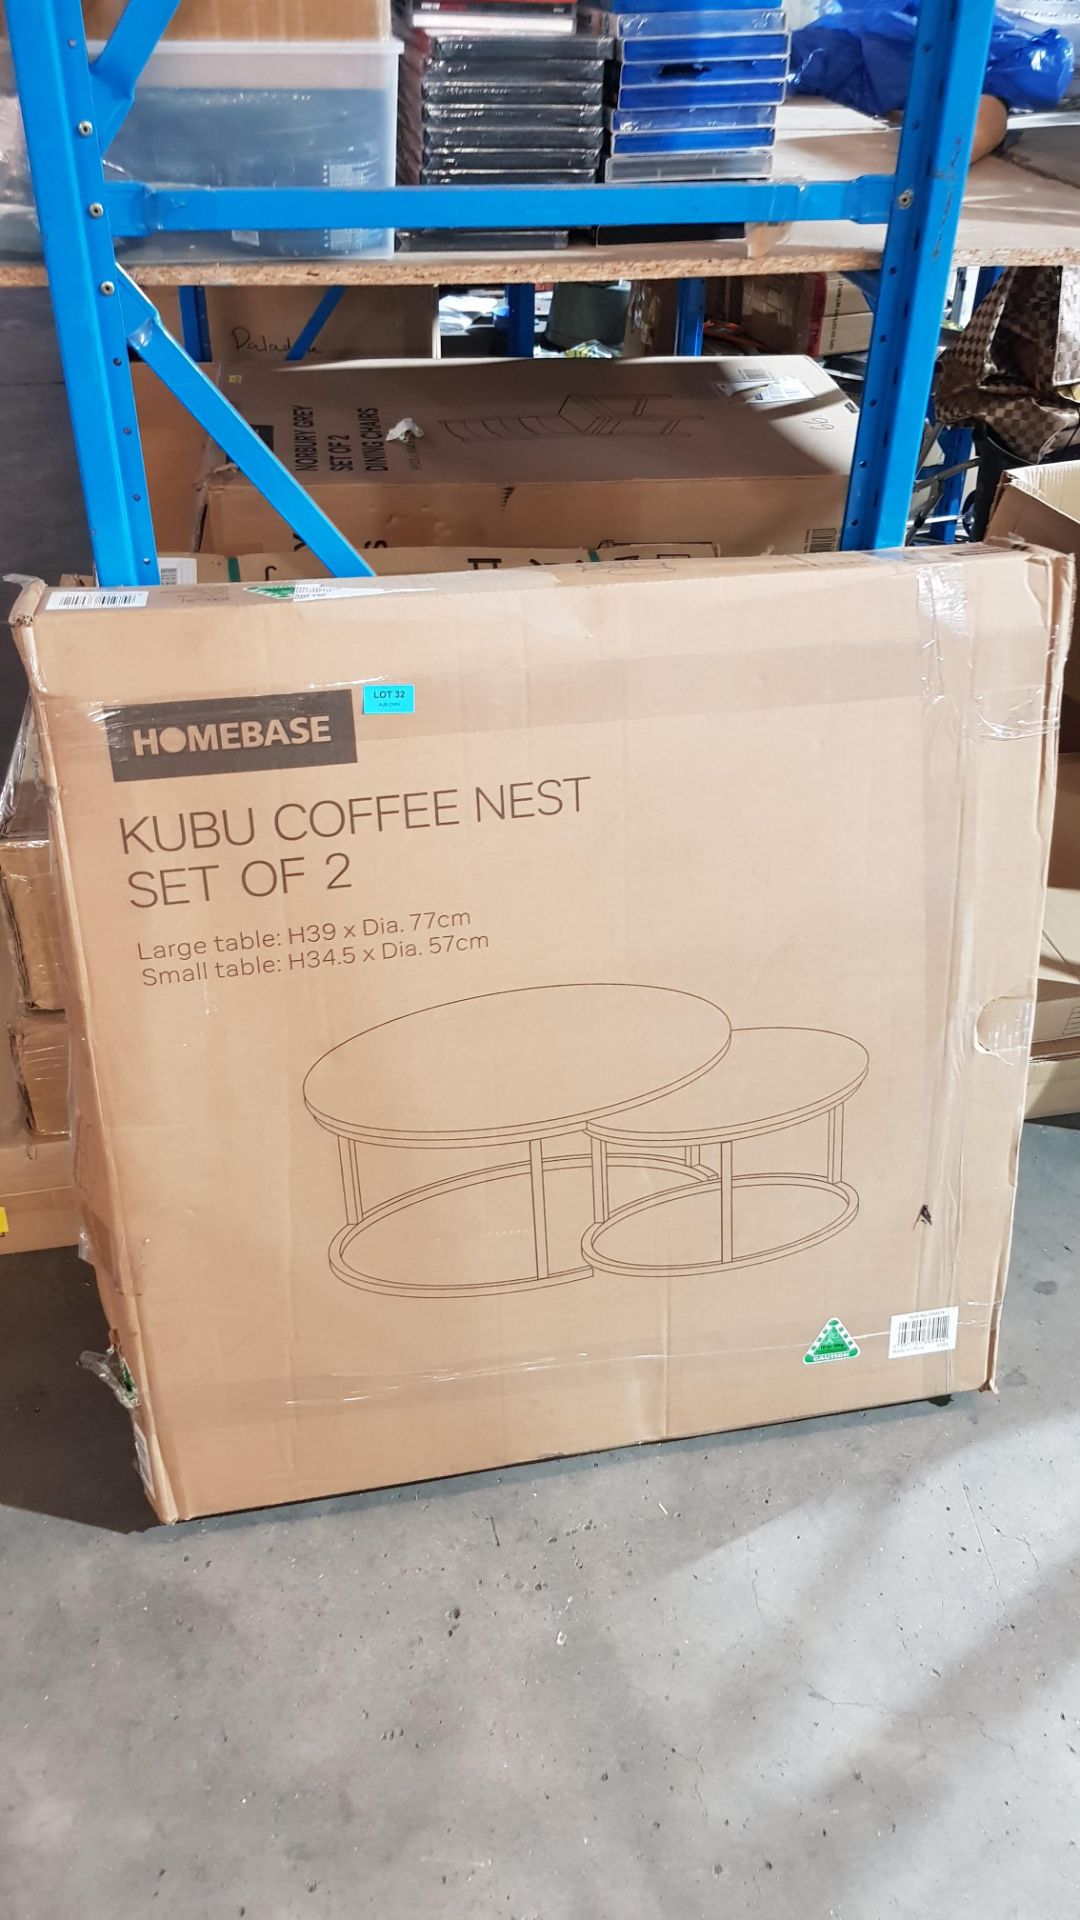 (2B) RRP £150. Kubu Coffee Nest Set Of 2. (Large Table H39x Dia 77cm, Small Table H34.5 x Dia 57cm) - Image 3 of 3